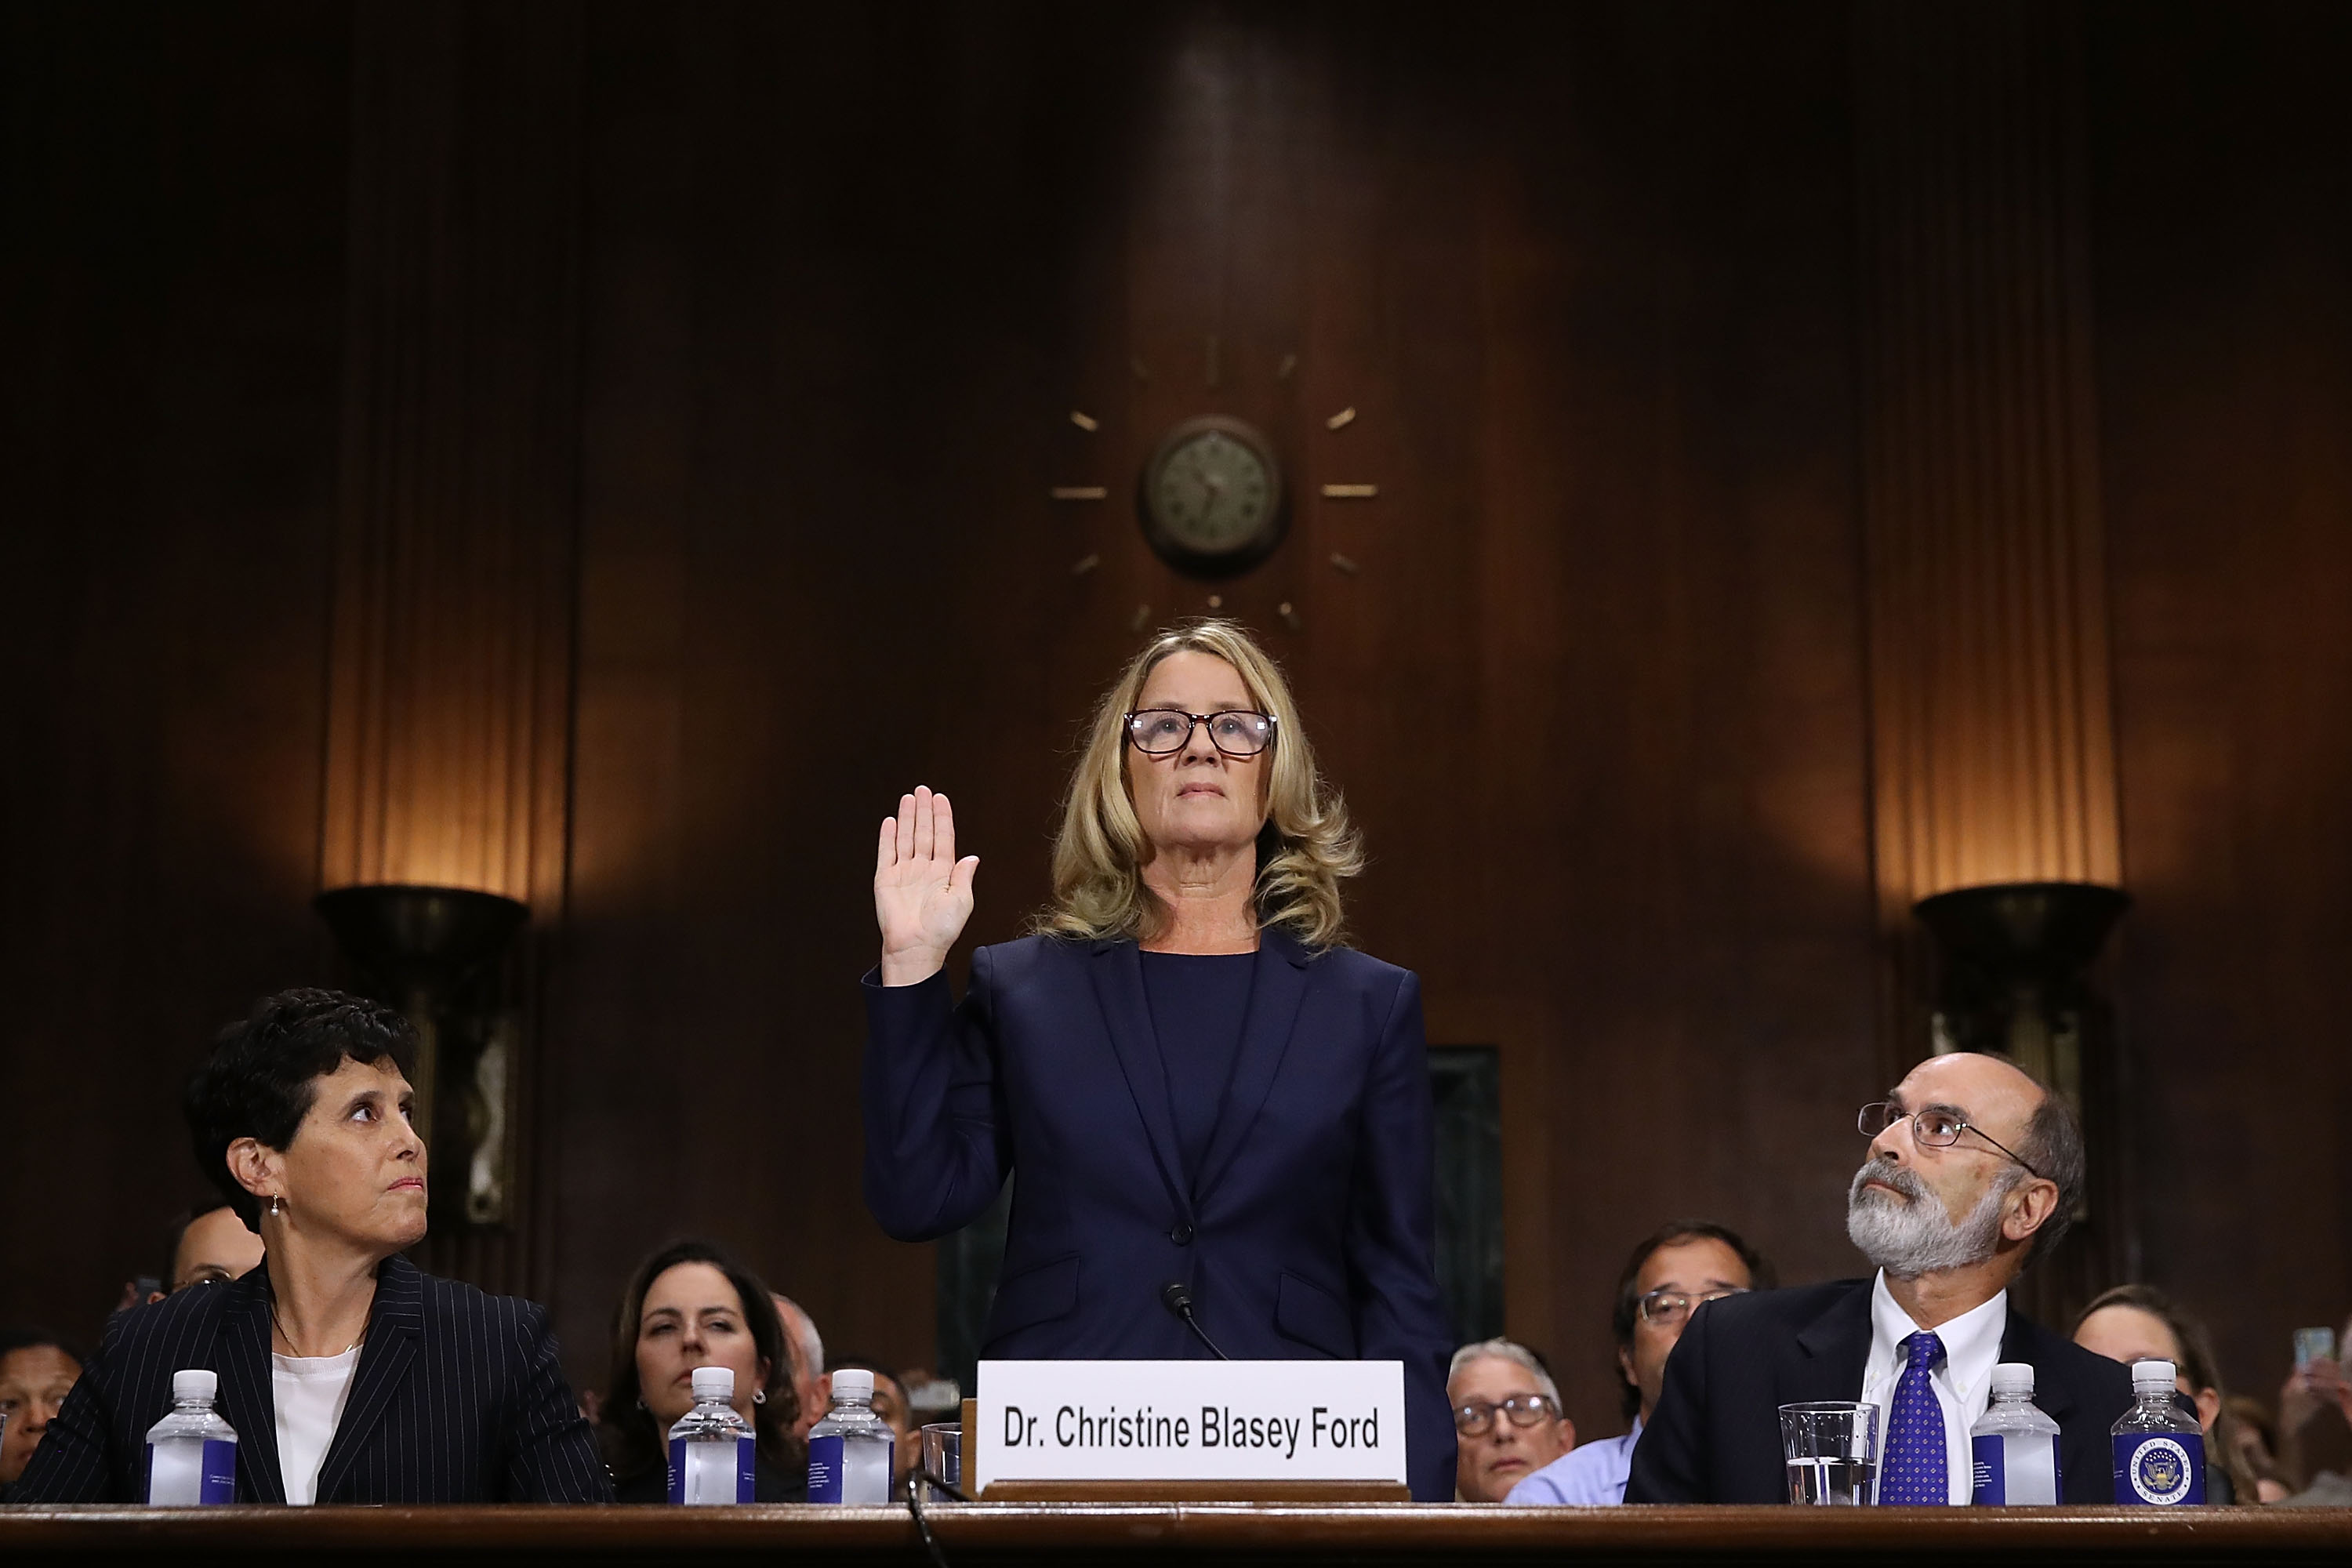 Far-Right Twitter Mocks Blasey Ford For ‘Fake Crying,’ ‘Lying’ About Her Story ...